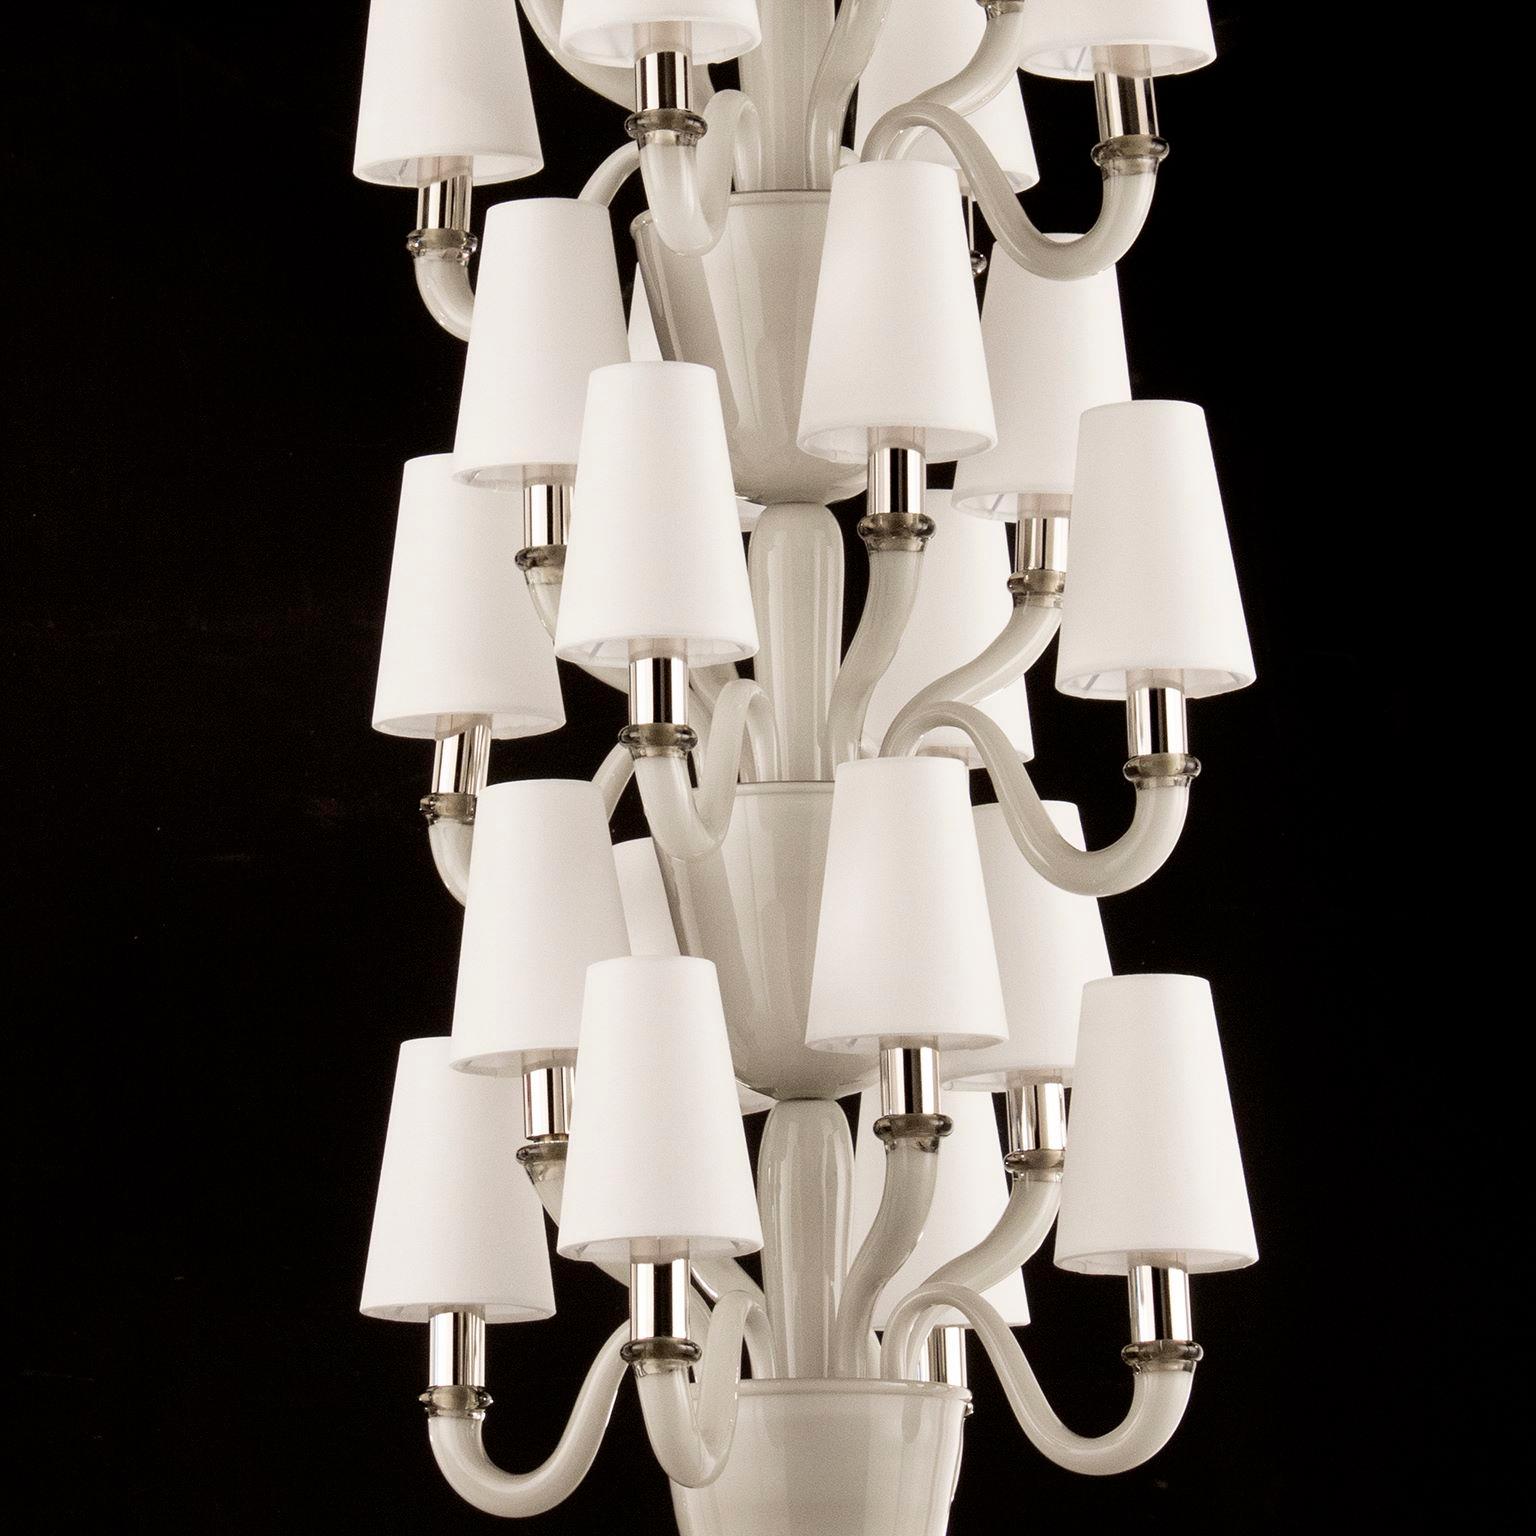 Italian 21st Century Huge Chandelier Grey Opaque Murano Glass, Lampshades by Multiforme For Sale